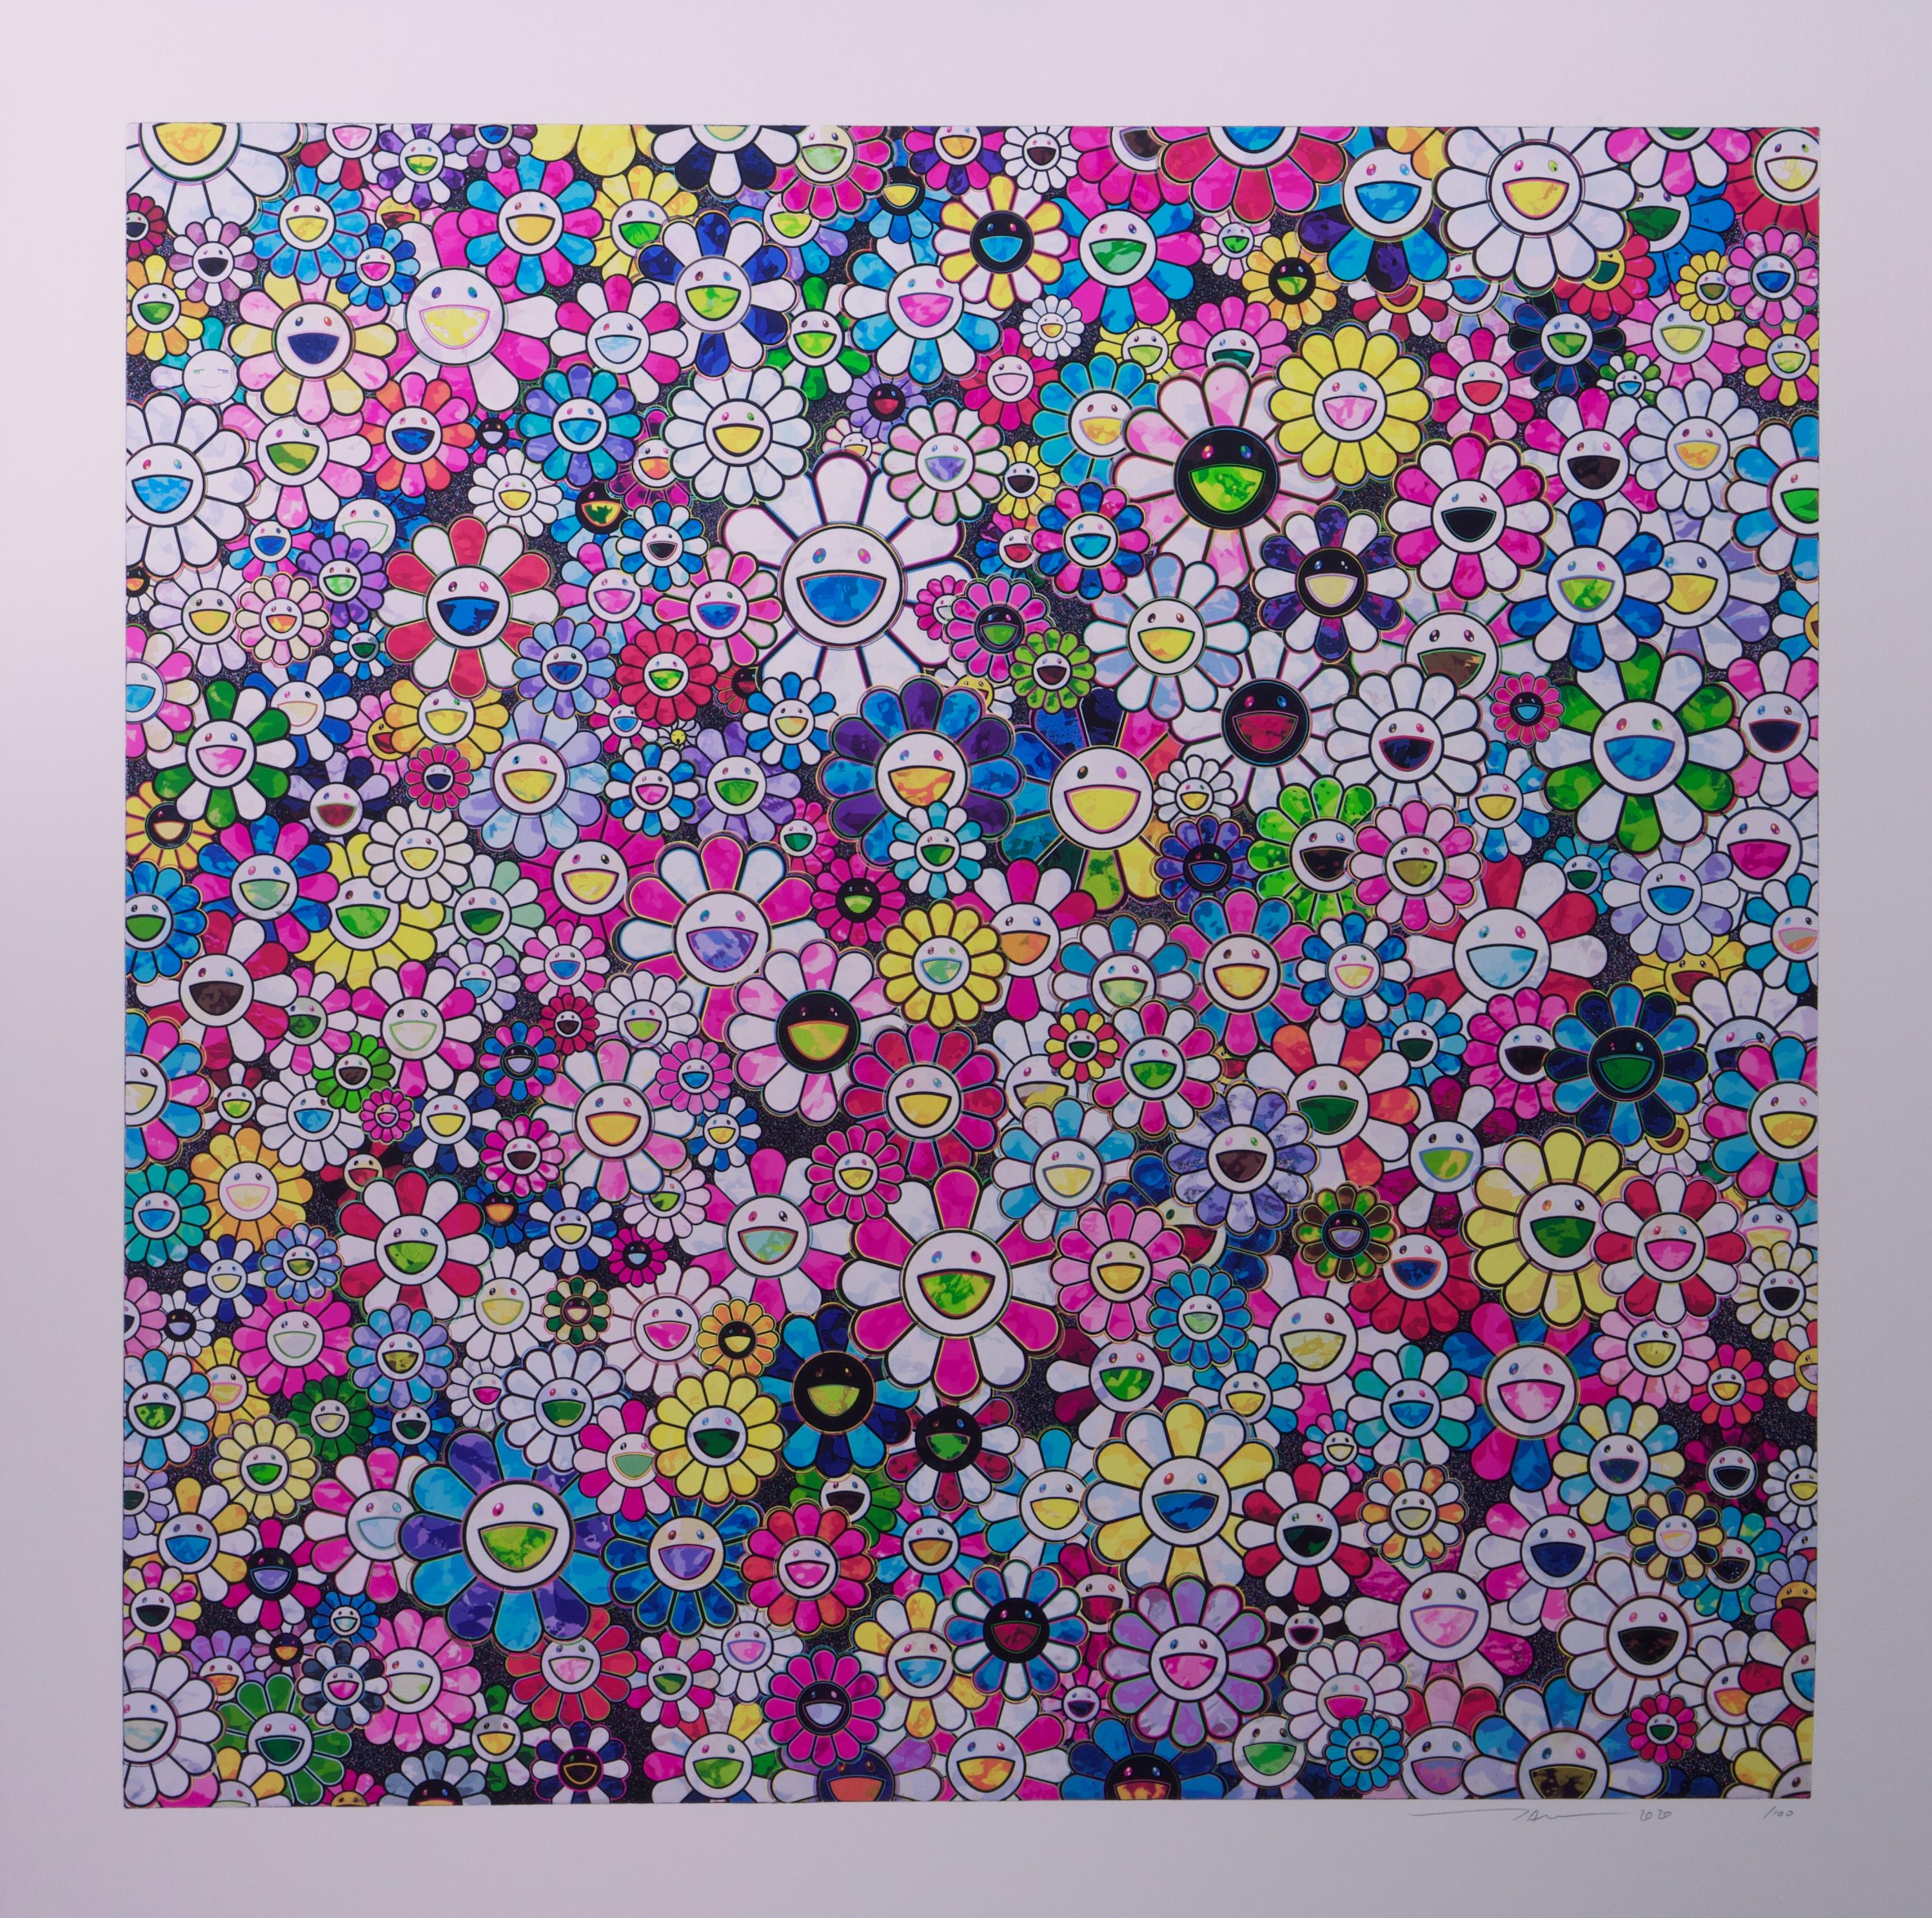 The Future will Be Full of Smile! For Sure! - Print by Takashi Murakami